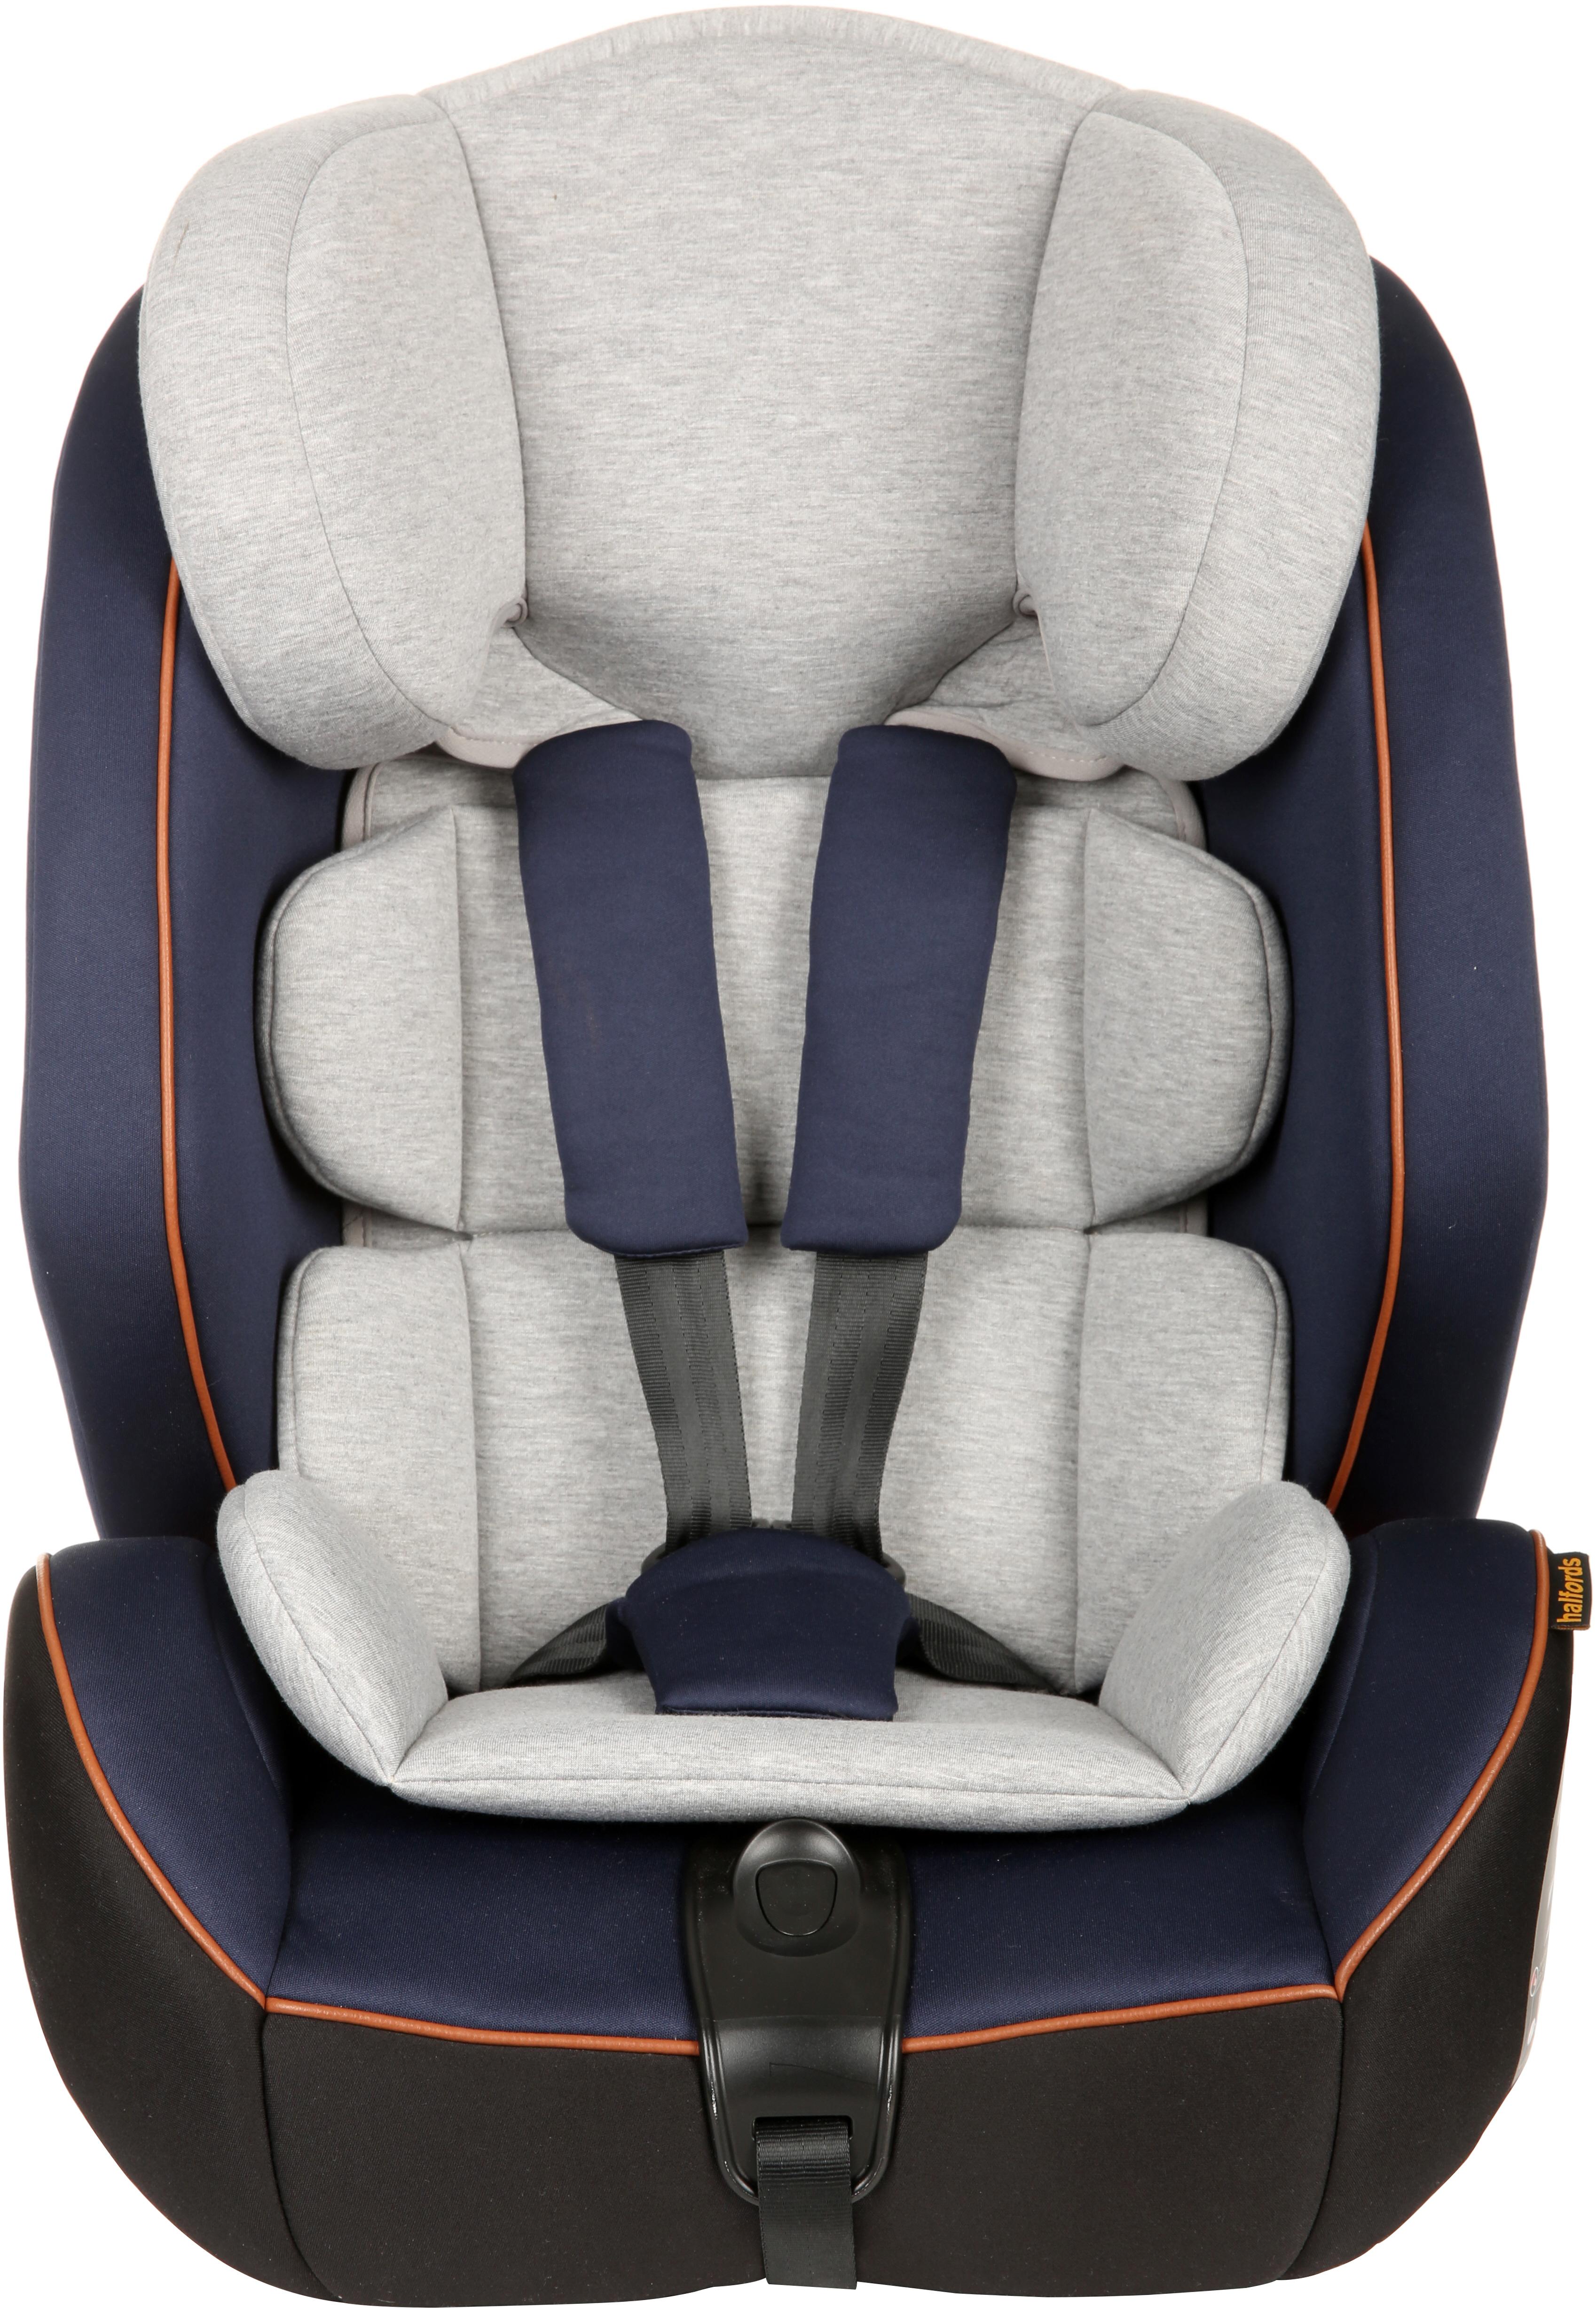 3 Isofix Child Car Seat with Top Tether 